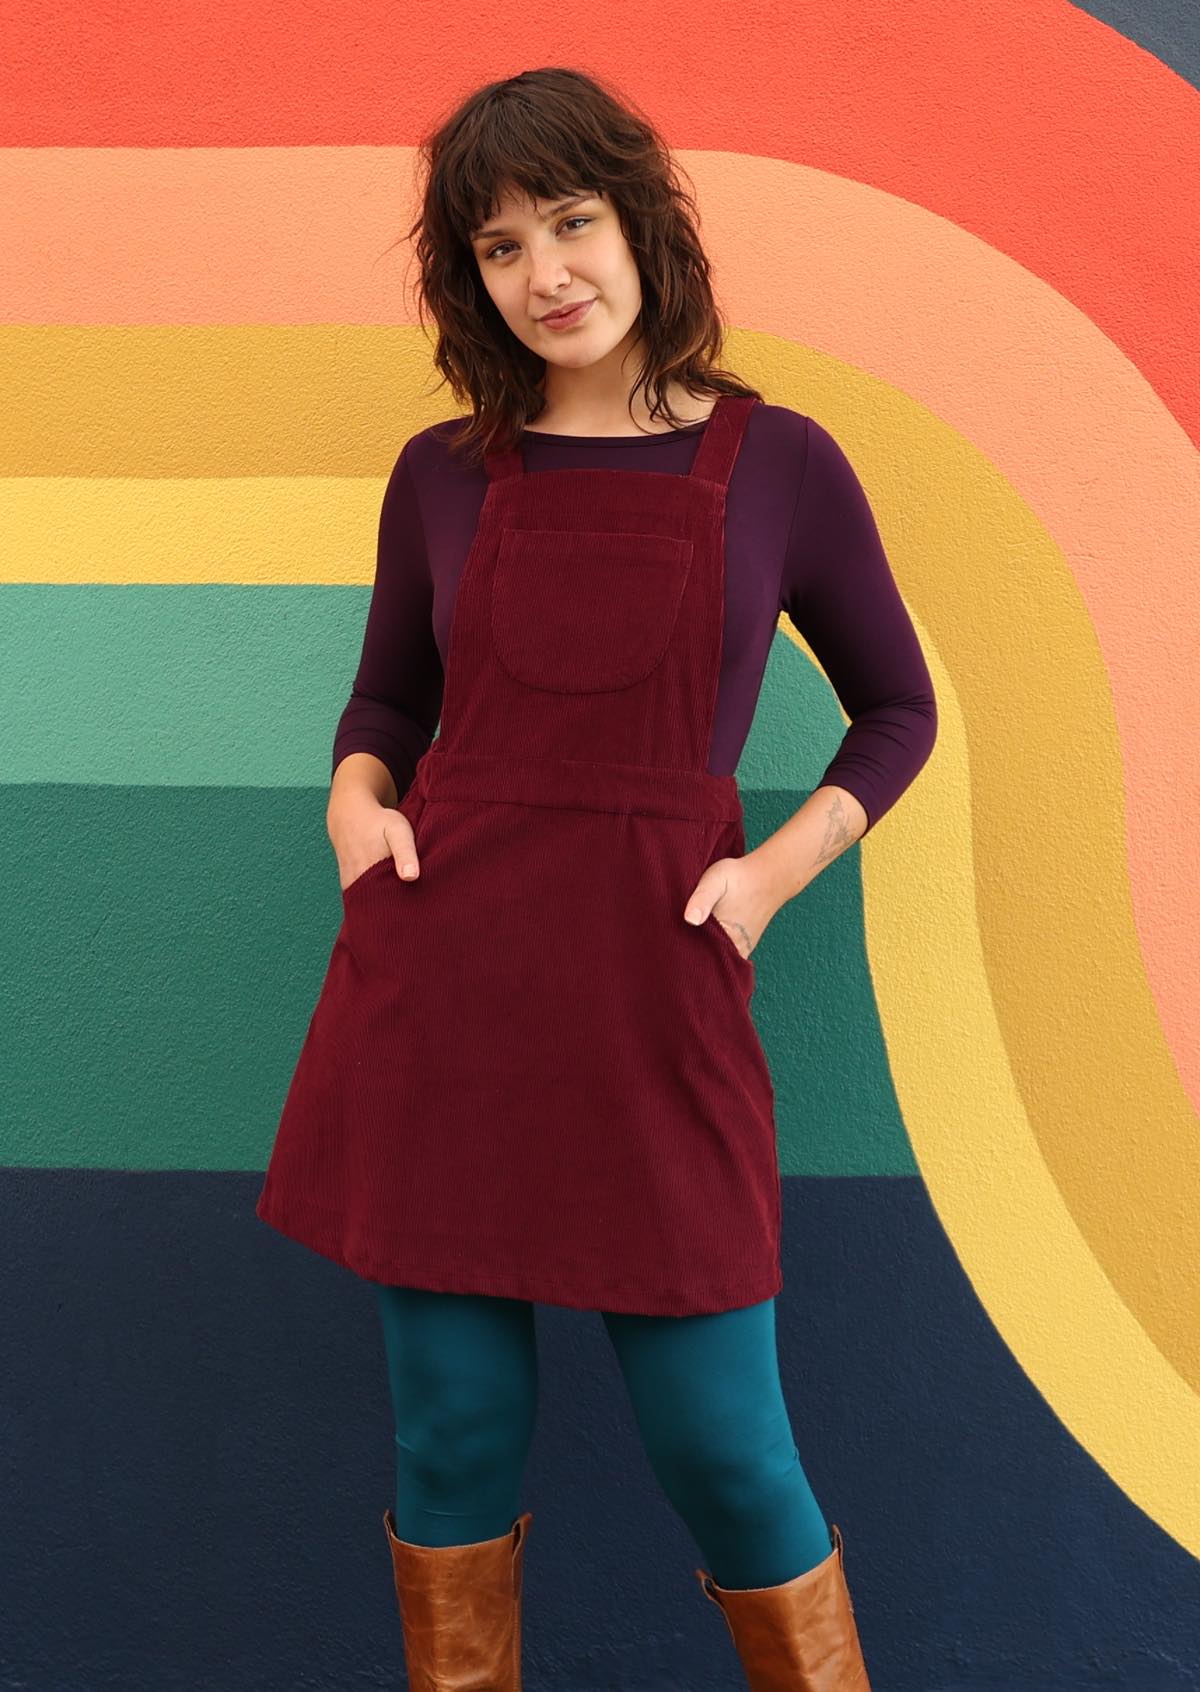 woman wearing maroon cotton corduroy pinafore over purple top and teal leggings  with hands in pockets